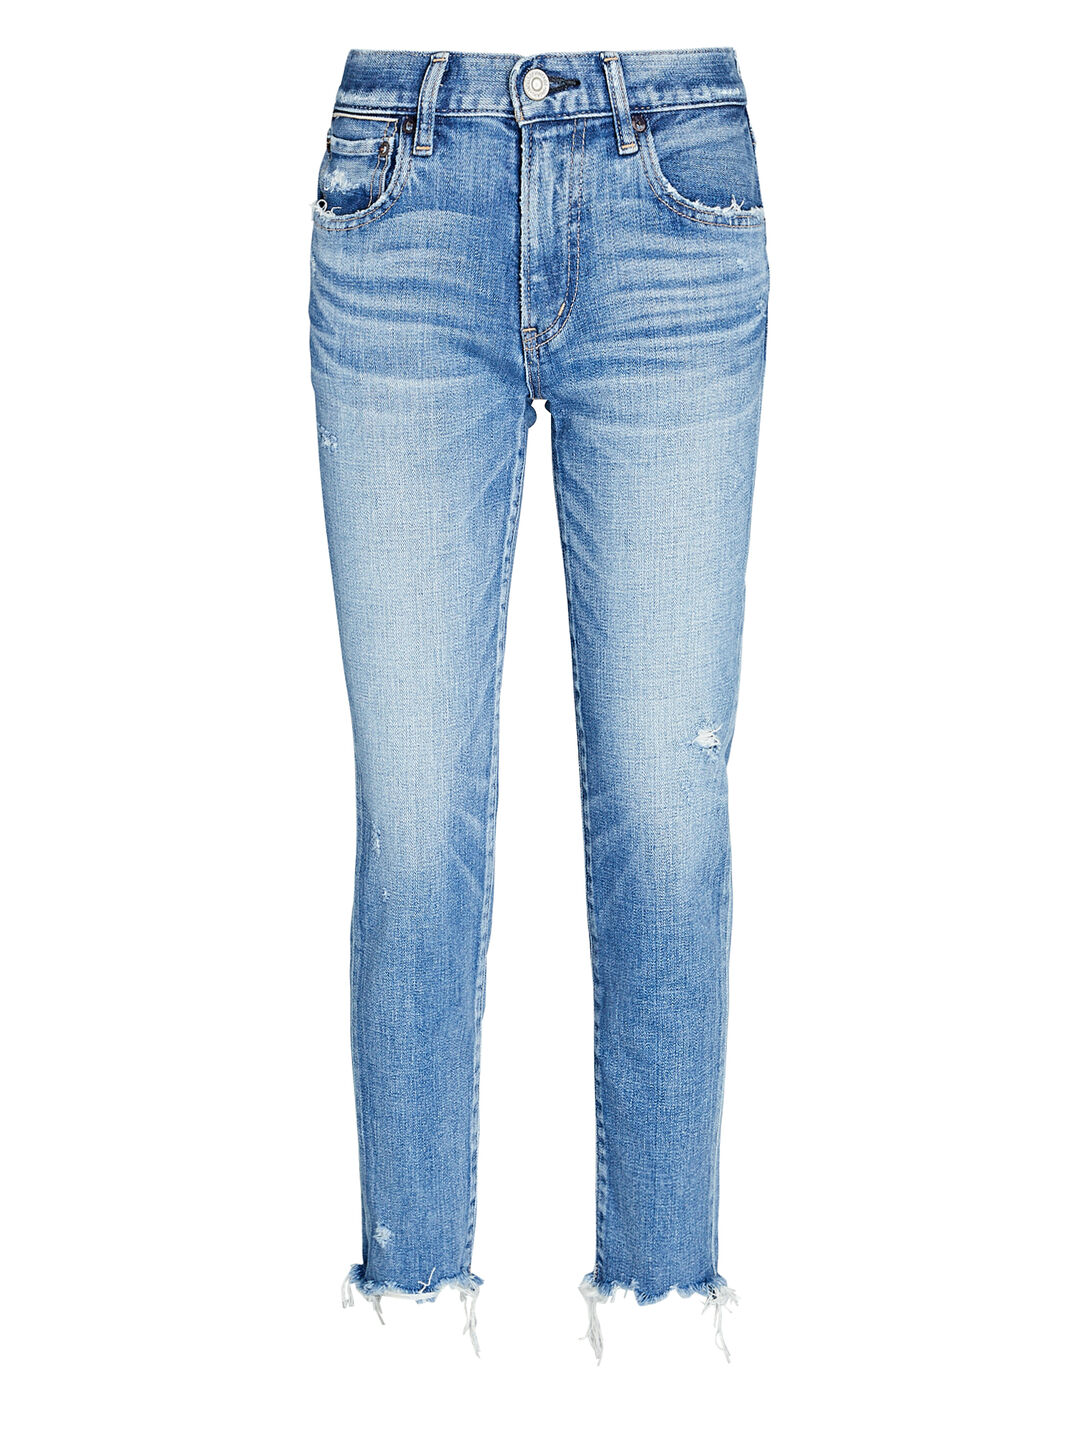 Checotah Cropped Skinny Jeans